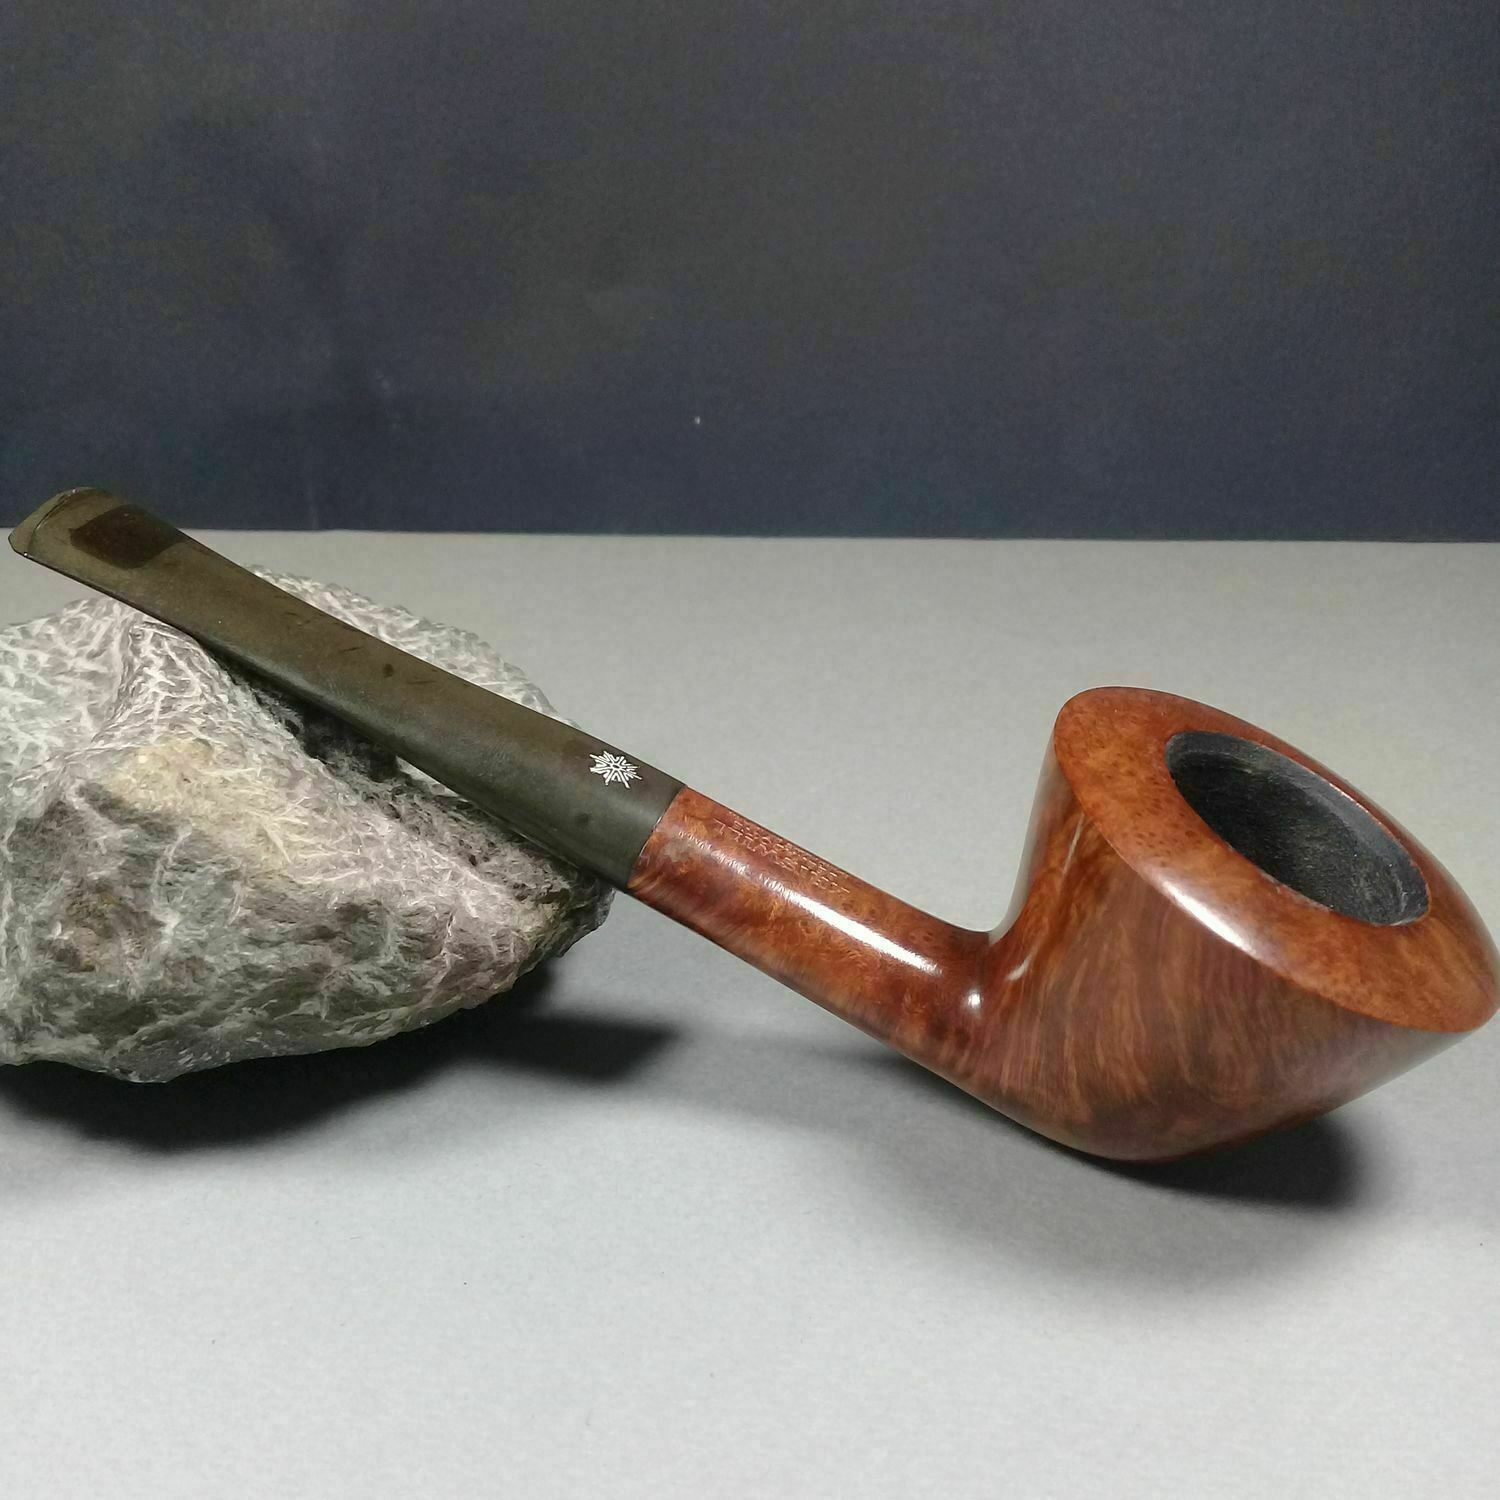 Kriswill Bernadotte 09 Smooth Polished 1970s Unburnt Tobacco Pipe